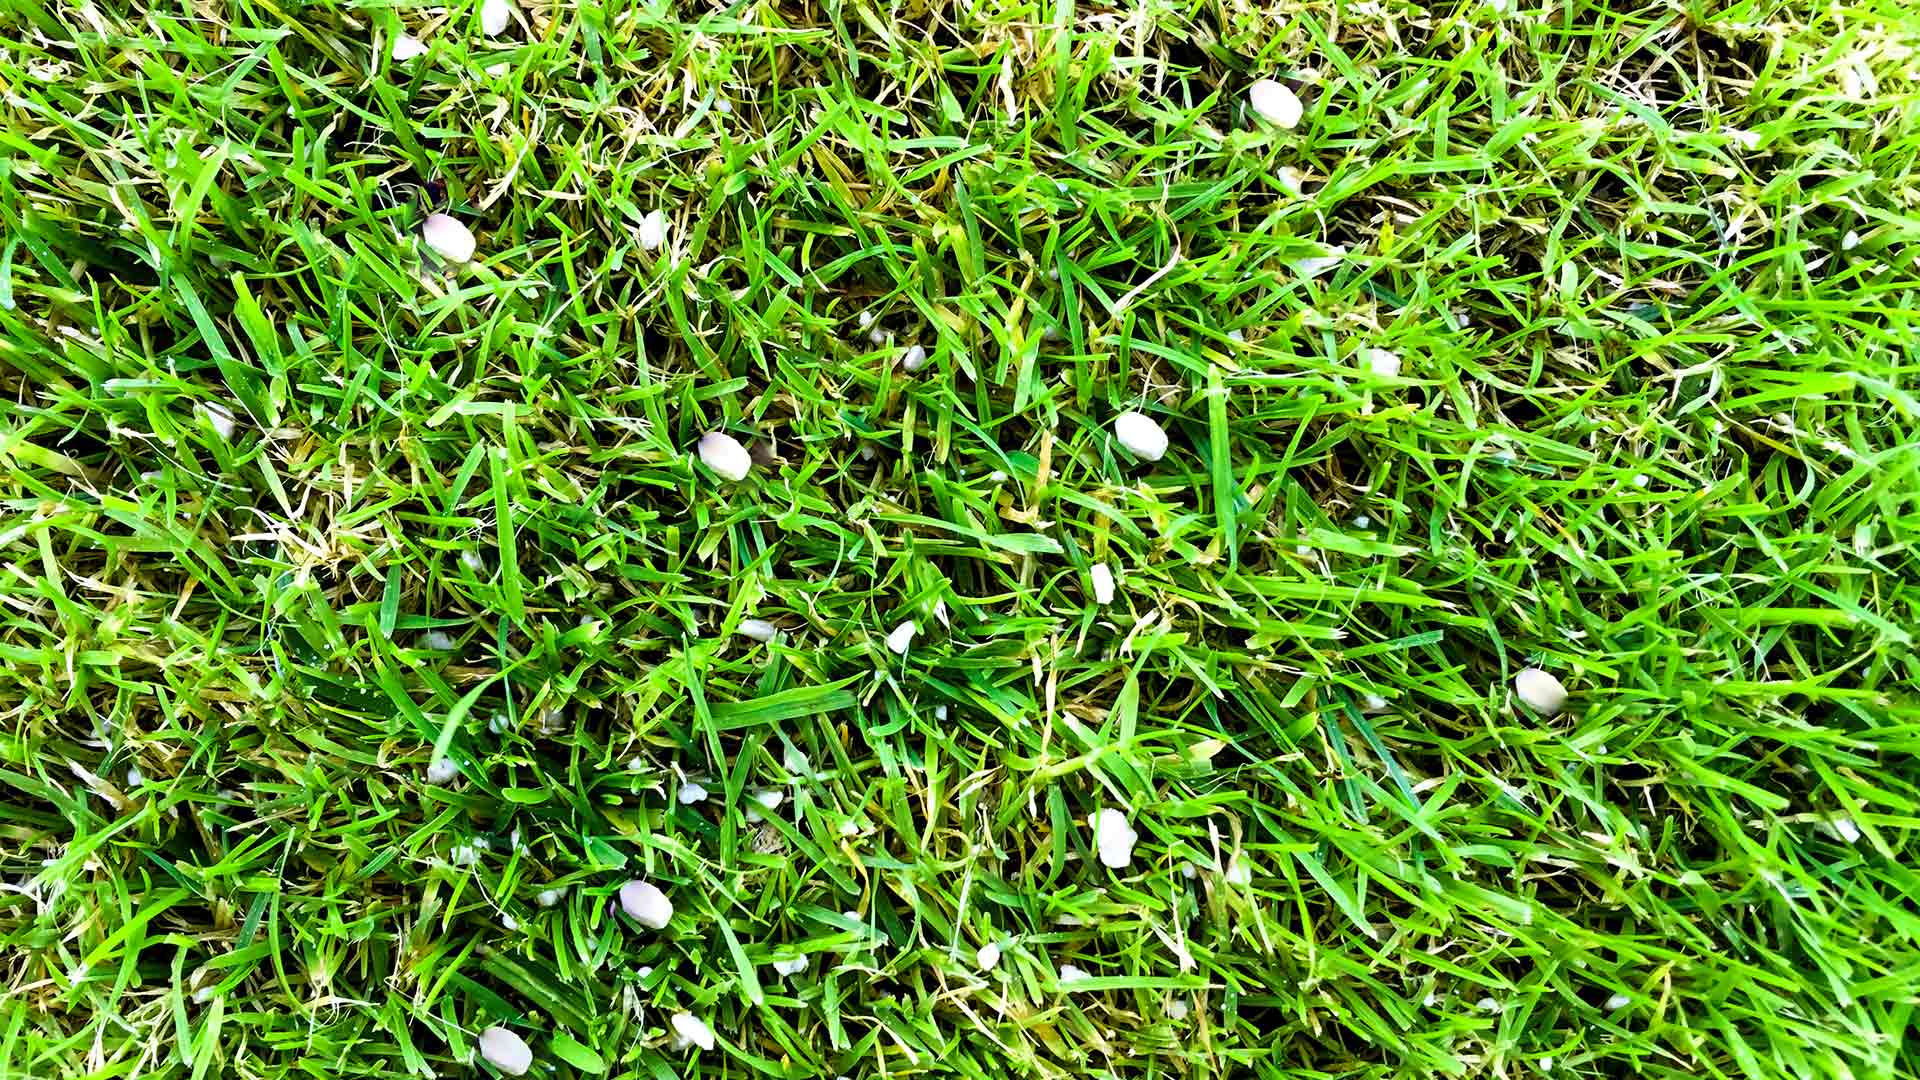 What Makes Slow-Release Fertilizer the Better Option for Lawns?